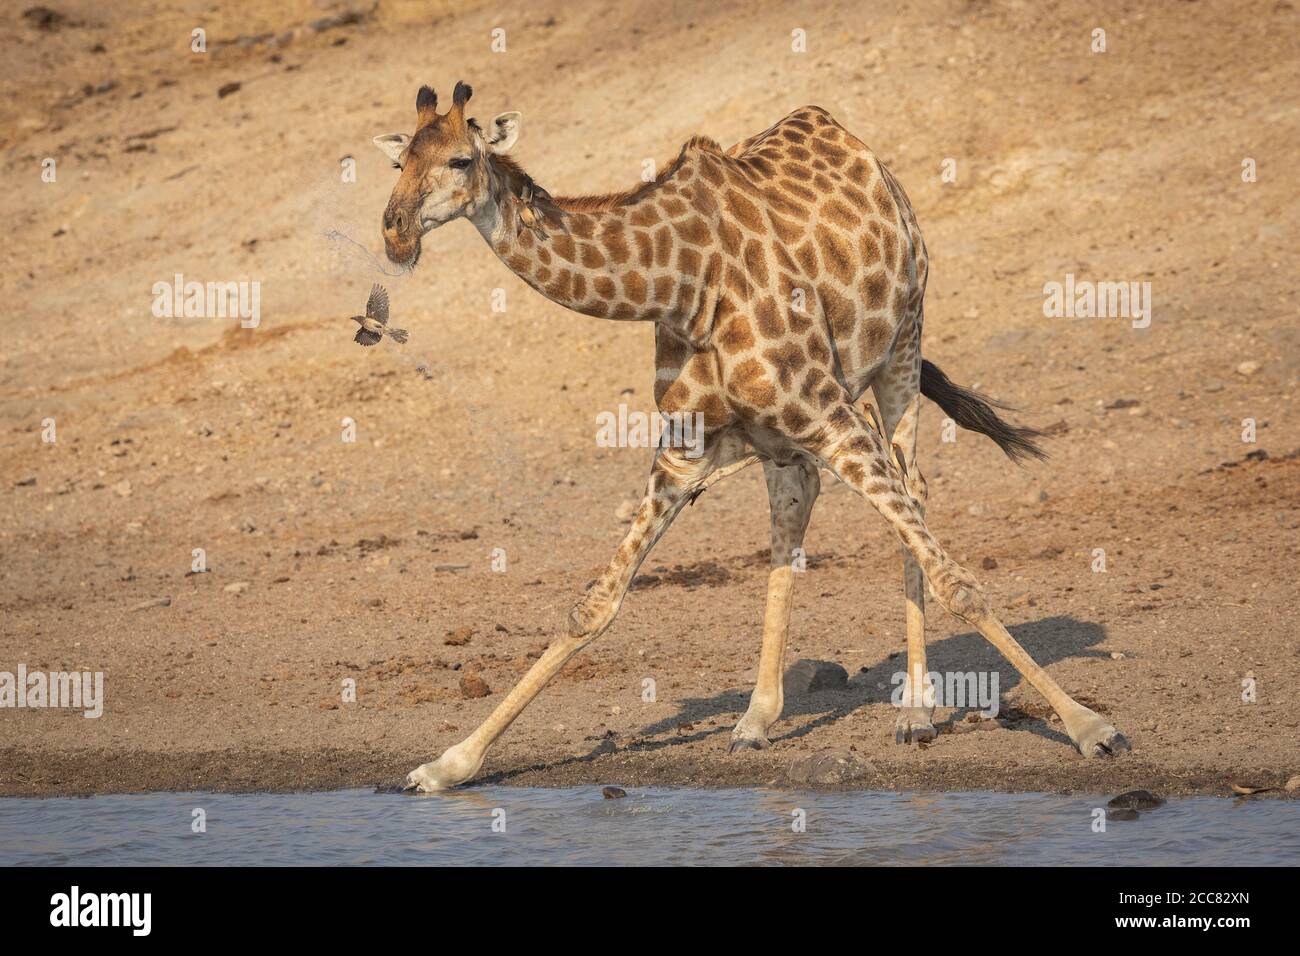 Landscape full body head on of drinking giraffe standing at the edge of water with ox peckers on its leg in Kruger Park South Africa Stock Photo